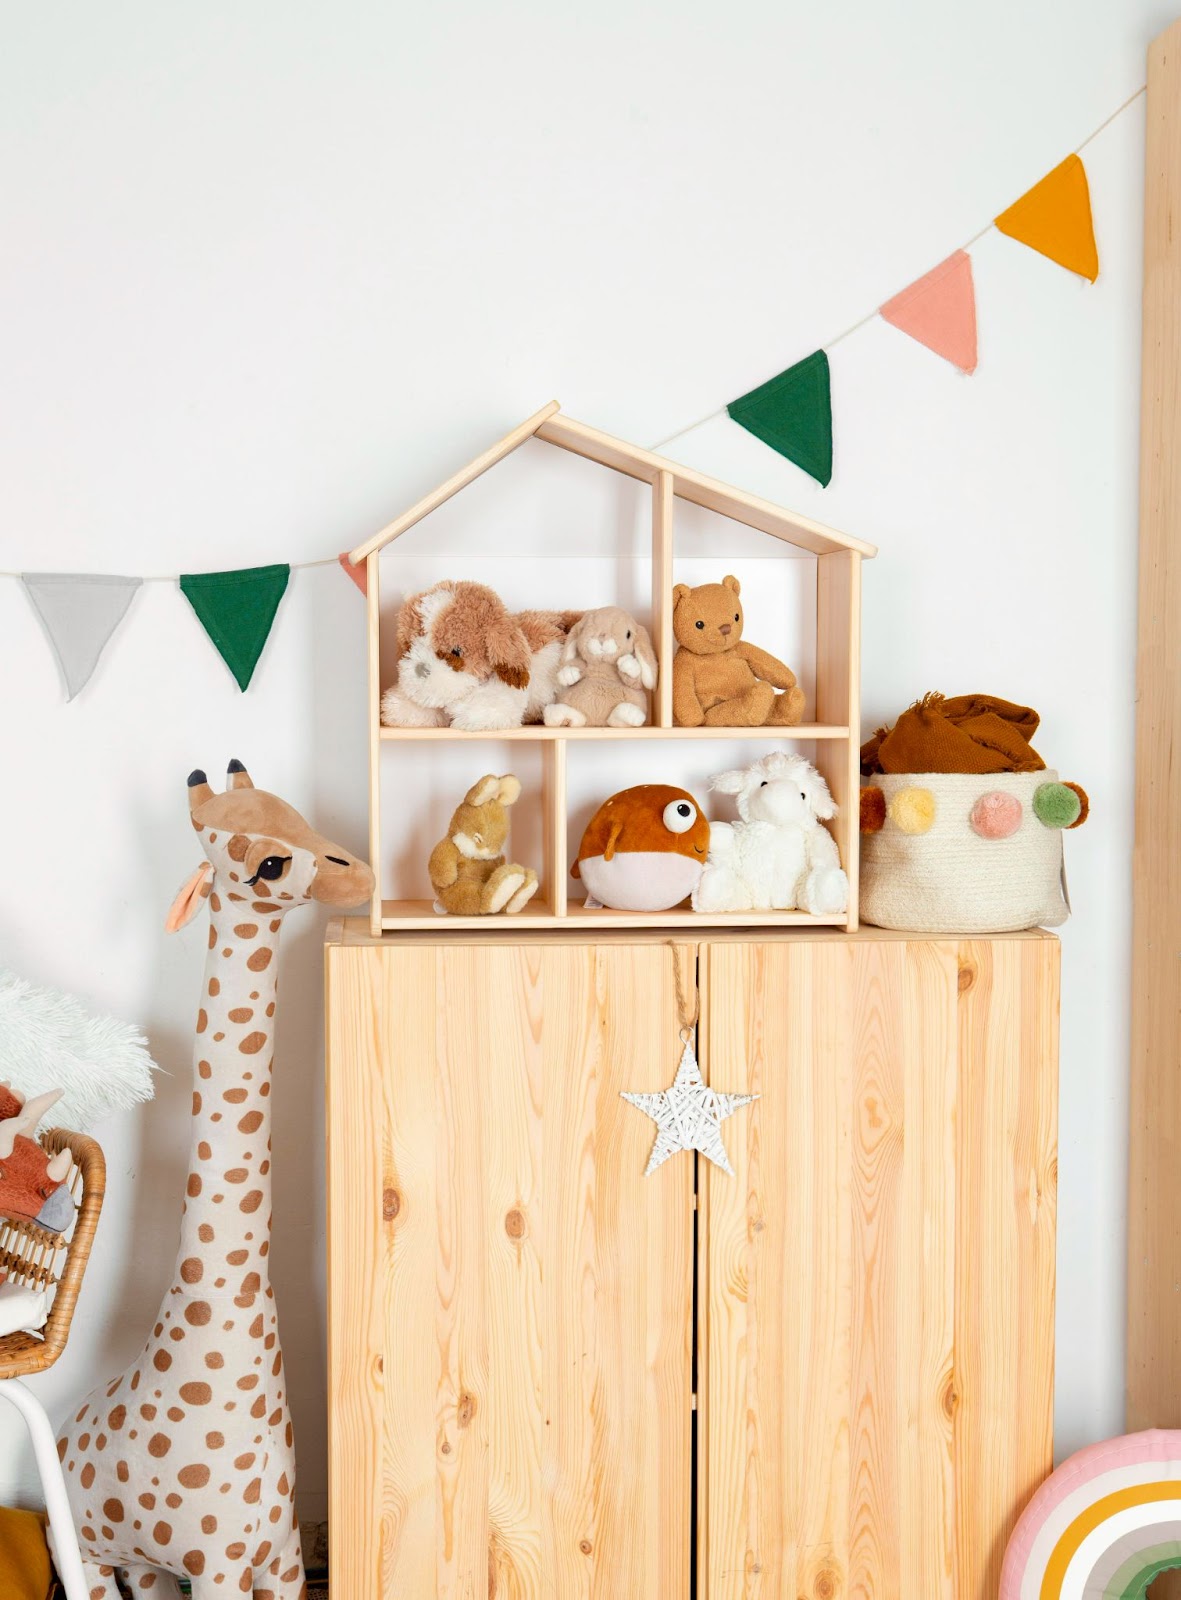 Animal theme toddler’s bedroom -Toddler bedroom ideas featured image - Baby Journey